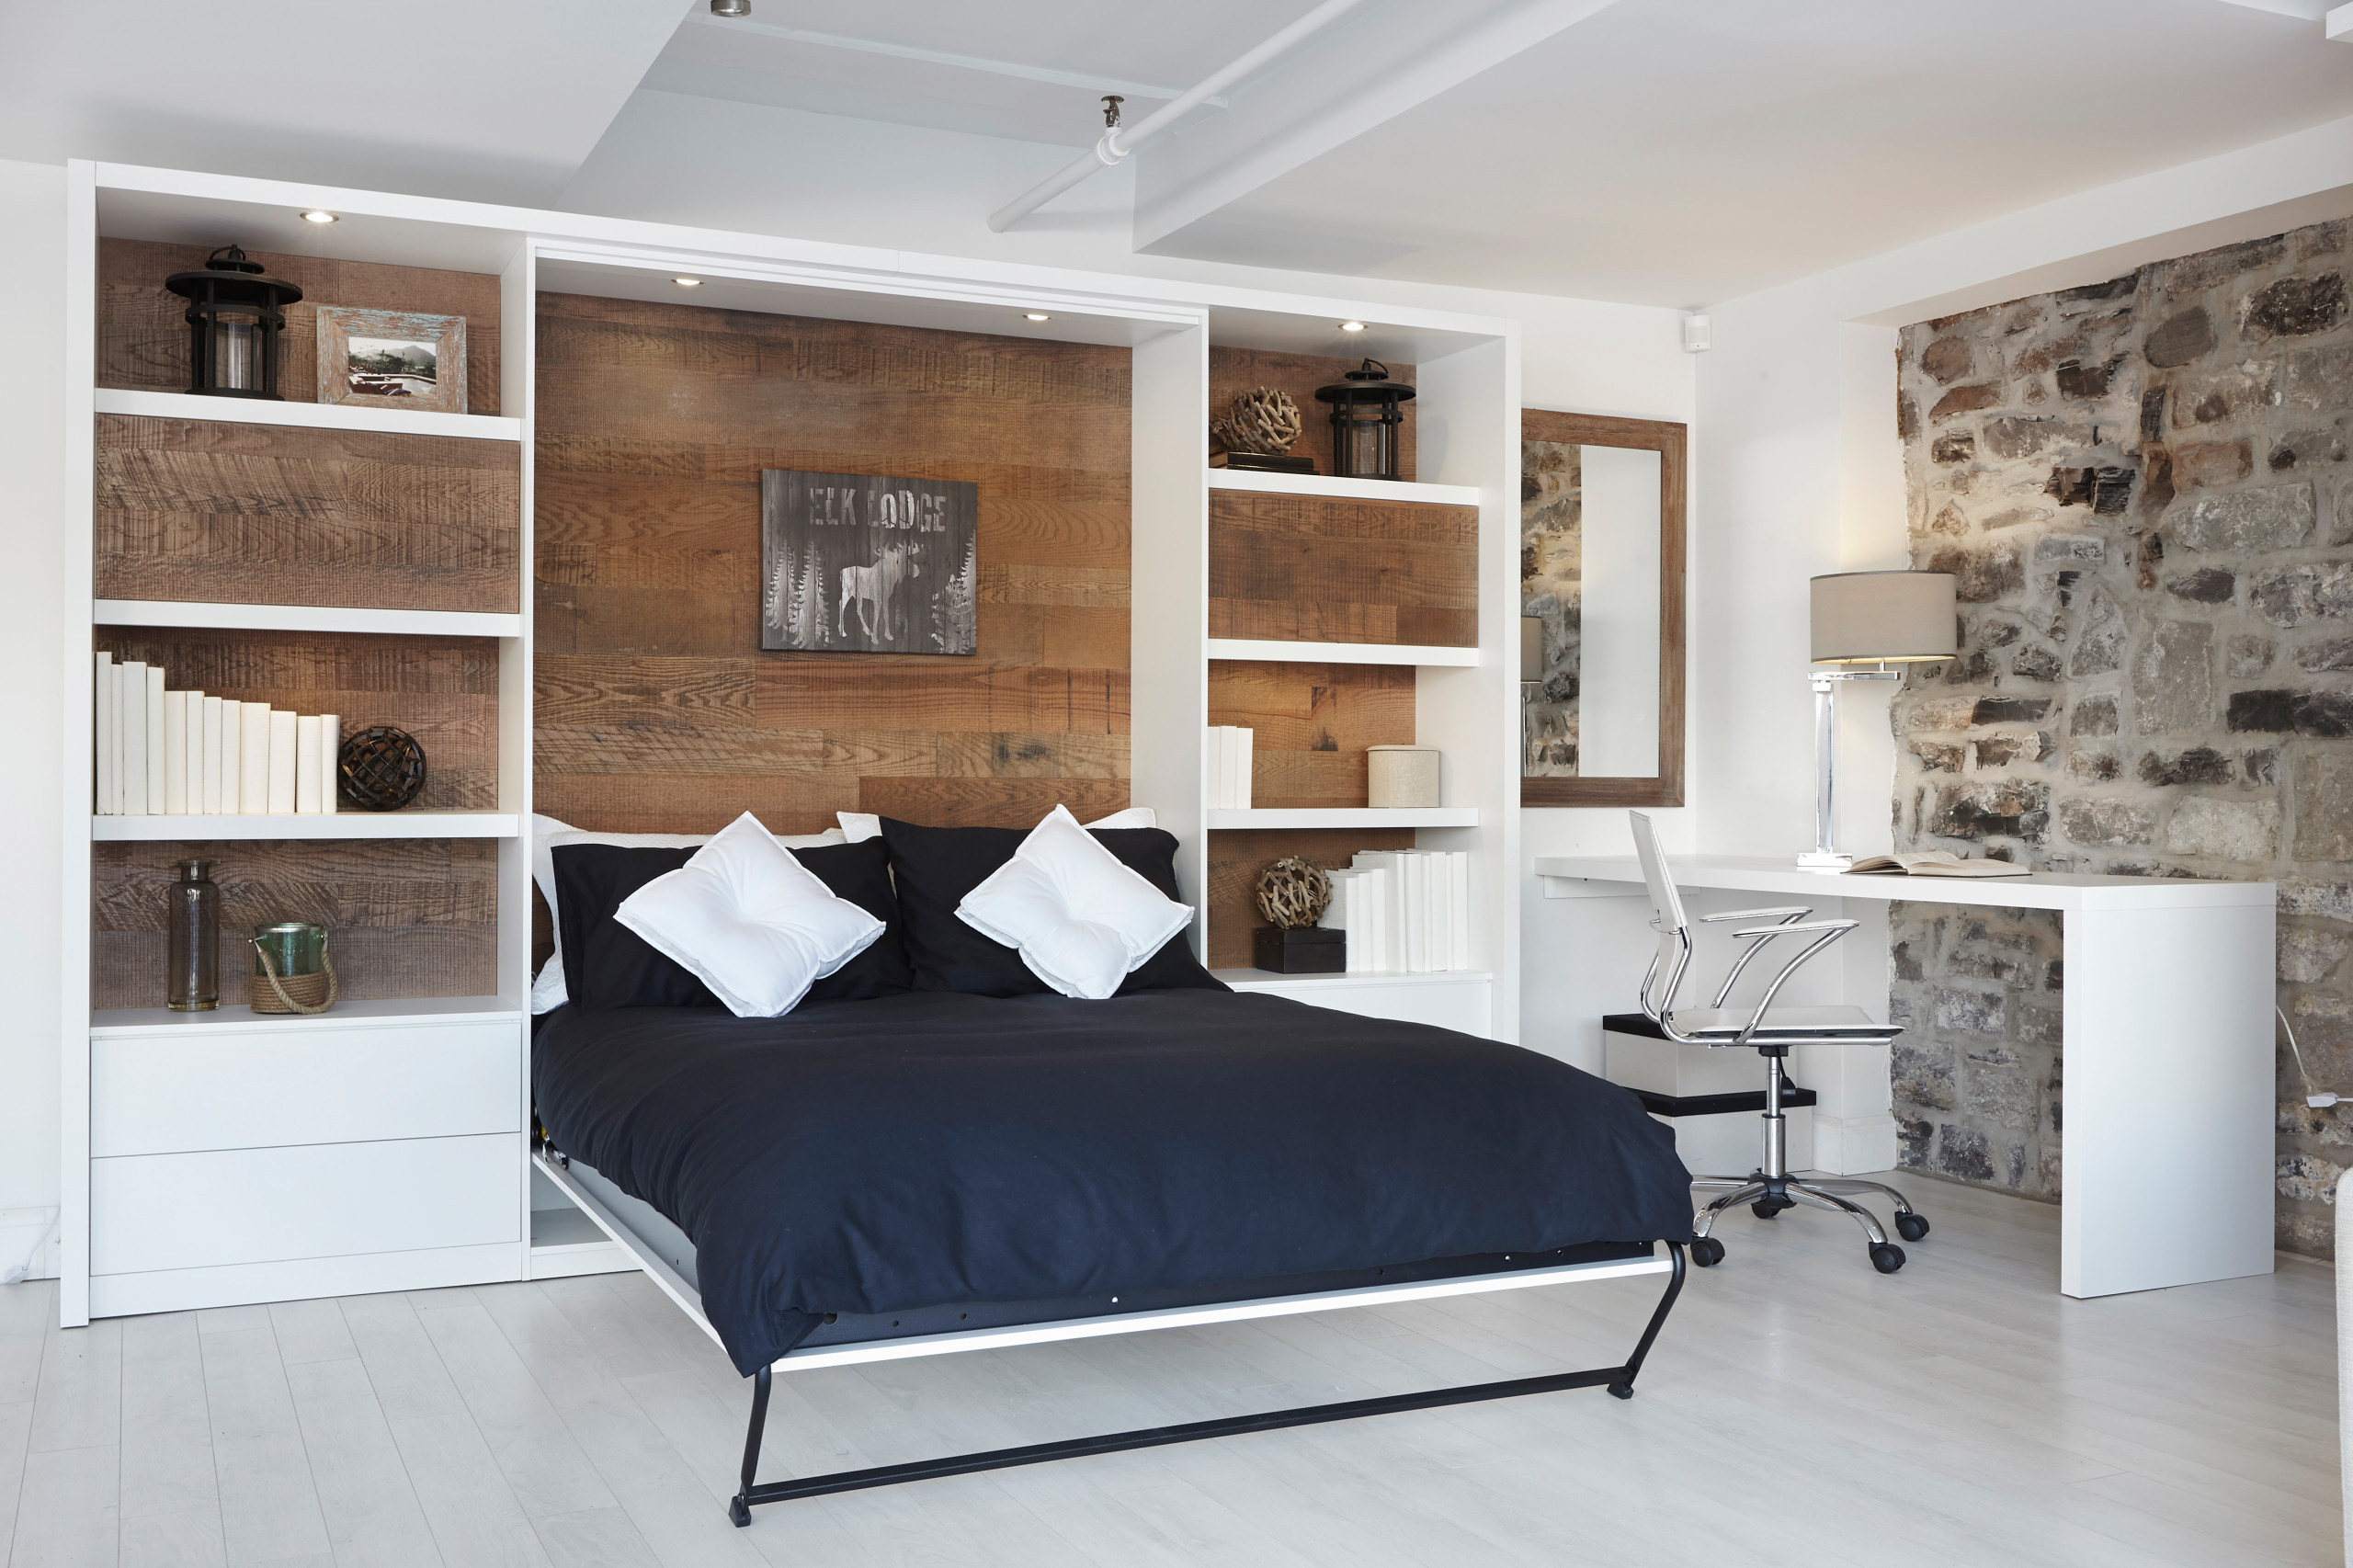 Vertical wall bed | Lits escamotables verticaux - Industrial - Bedroom -  Montreal - by Limuro | Houzz